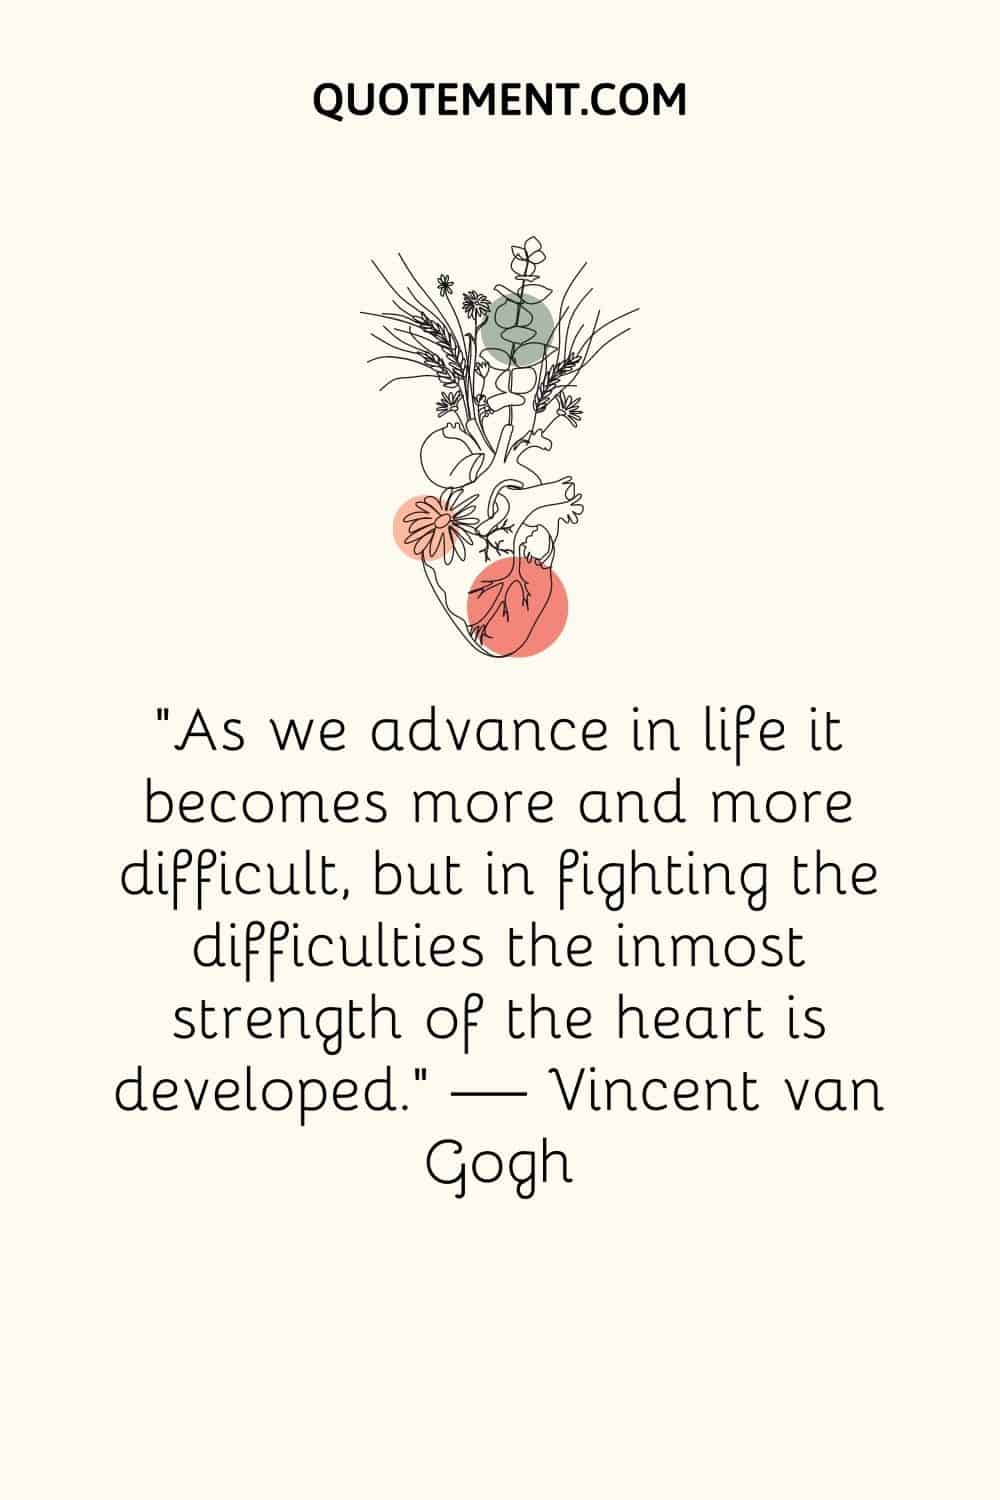 “As we advance in life it becomes more and more difficult, but in fighting the difficulties the inmost strength of the heart is developed.” ― Vincent van Gogh